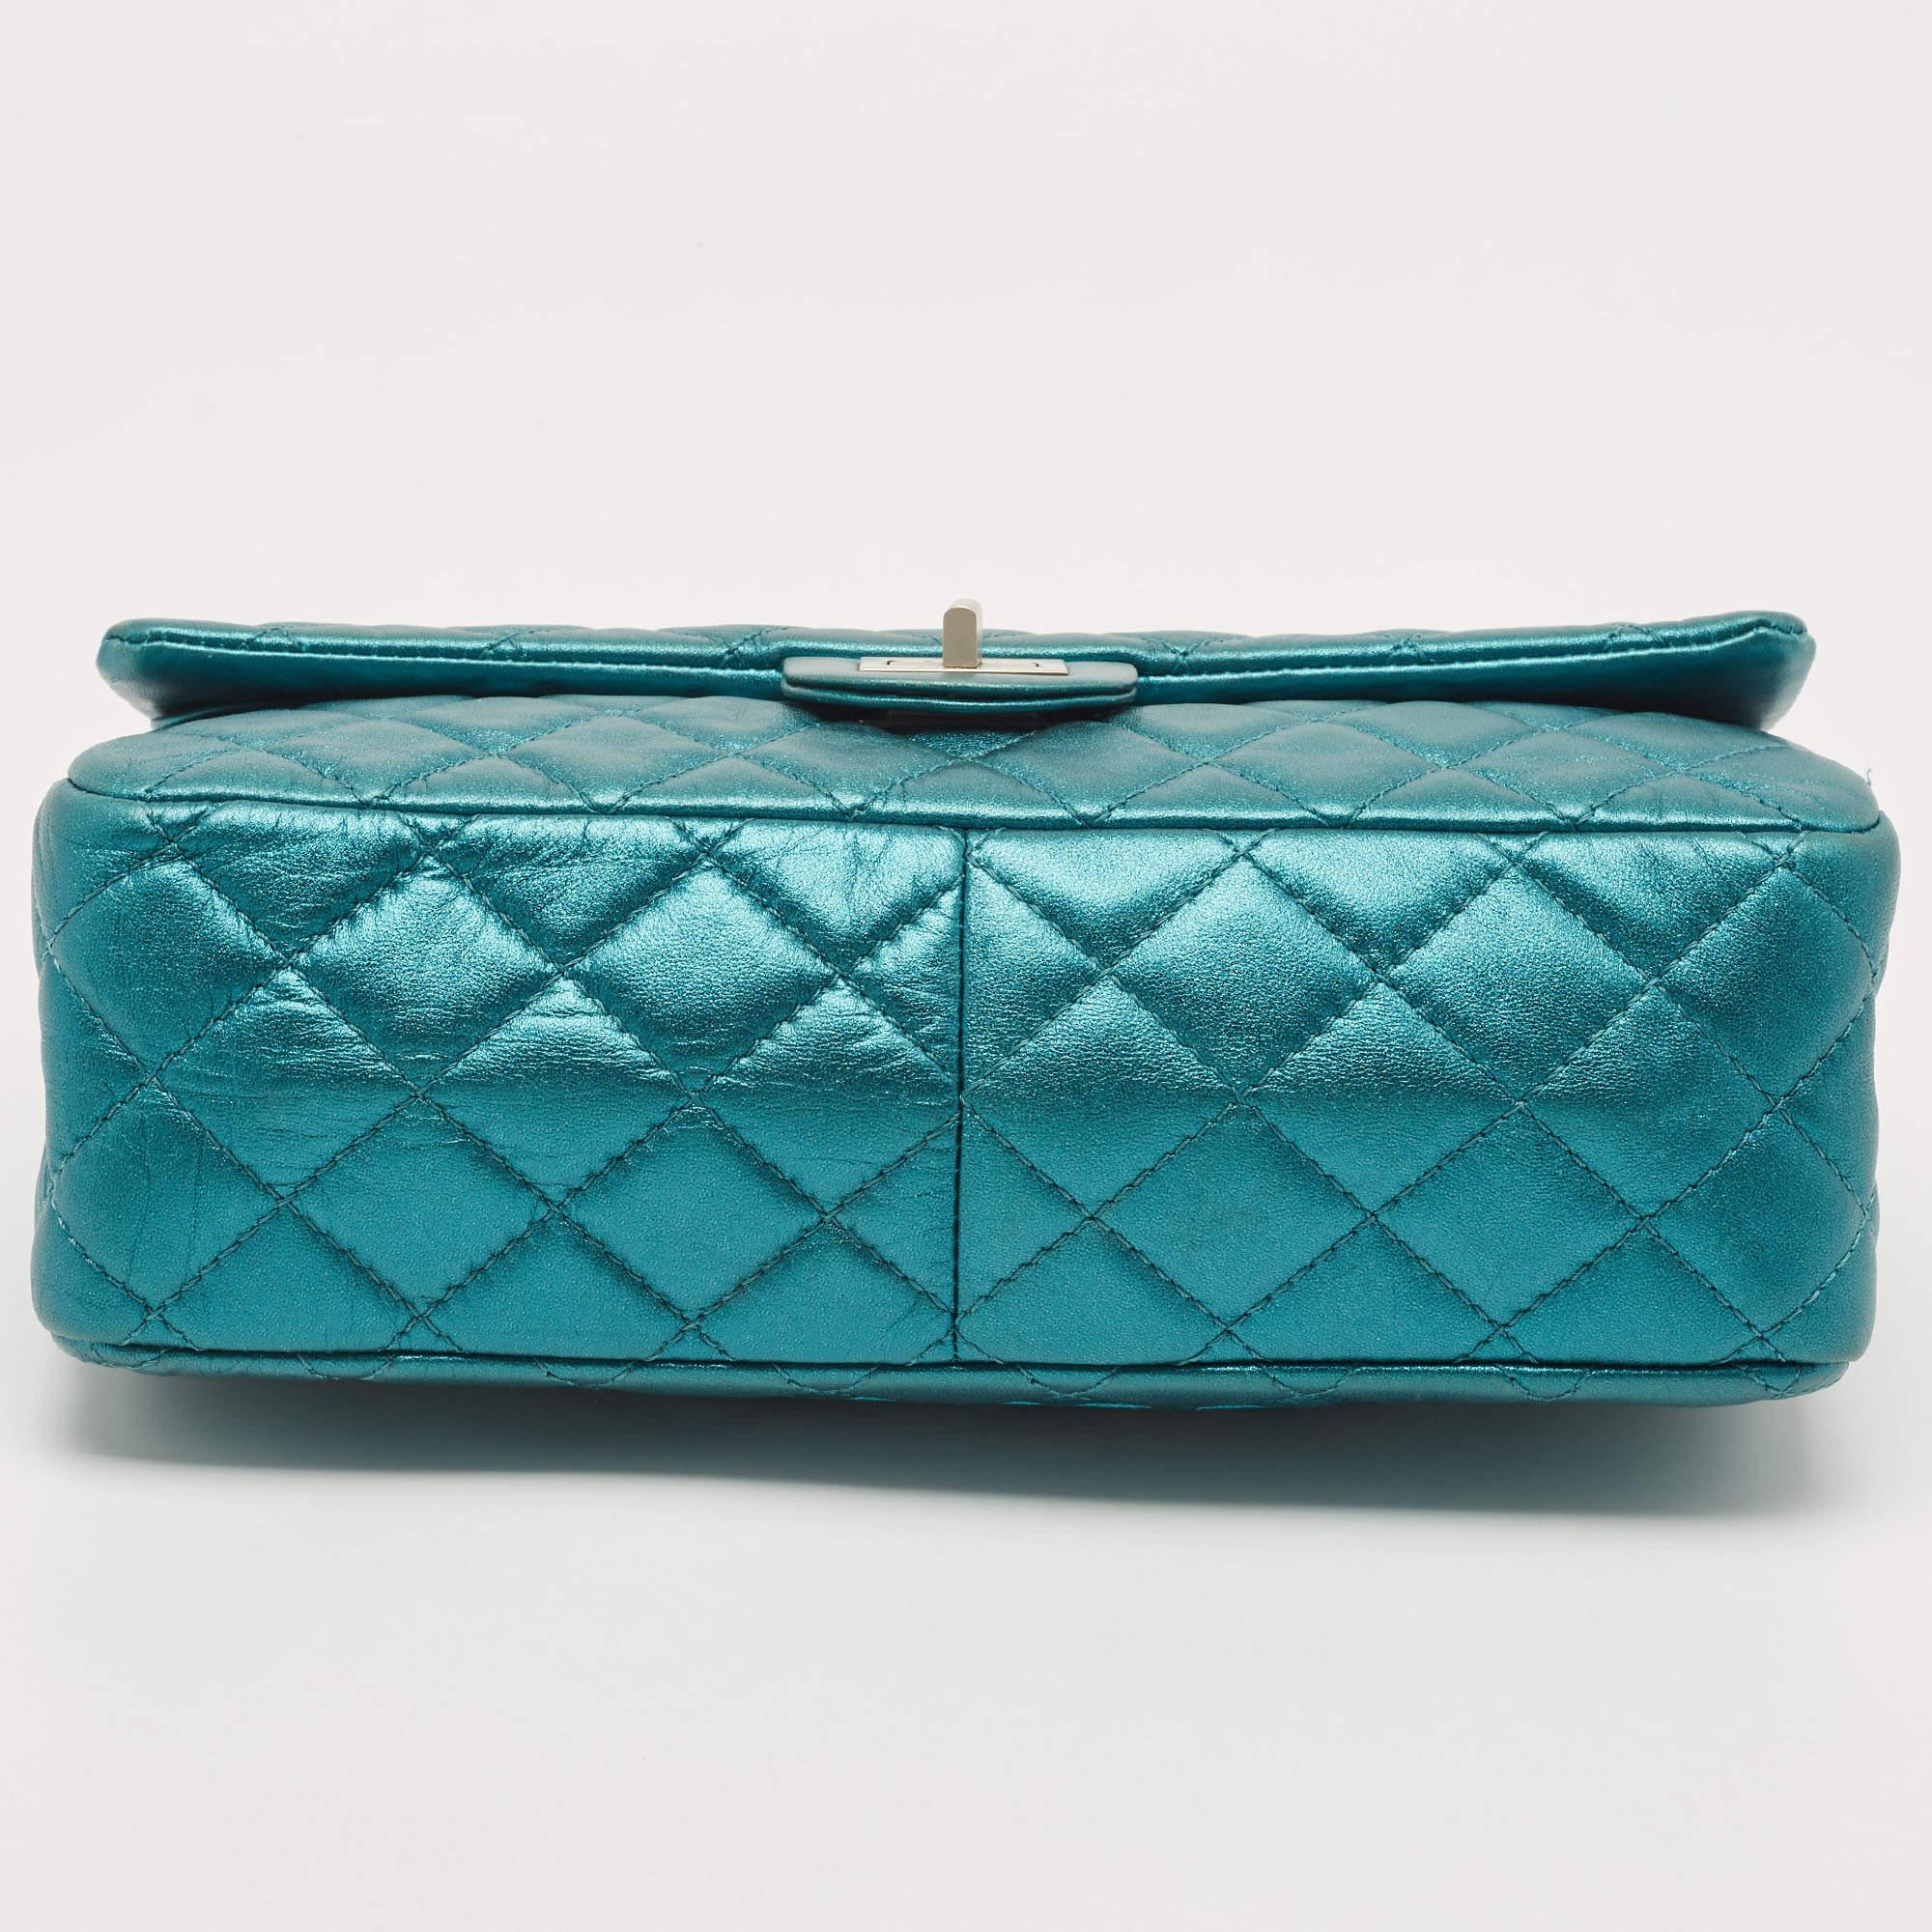 Women's Chanel Metallic Teal Green Quilted Leather Reissue 2.55 Classic 226 Flap Bag For Sale